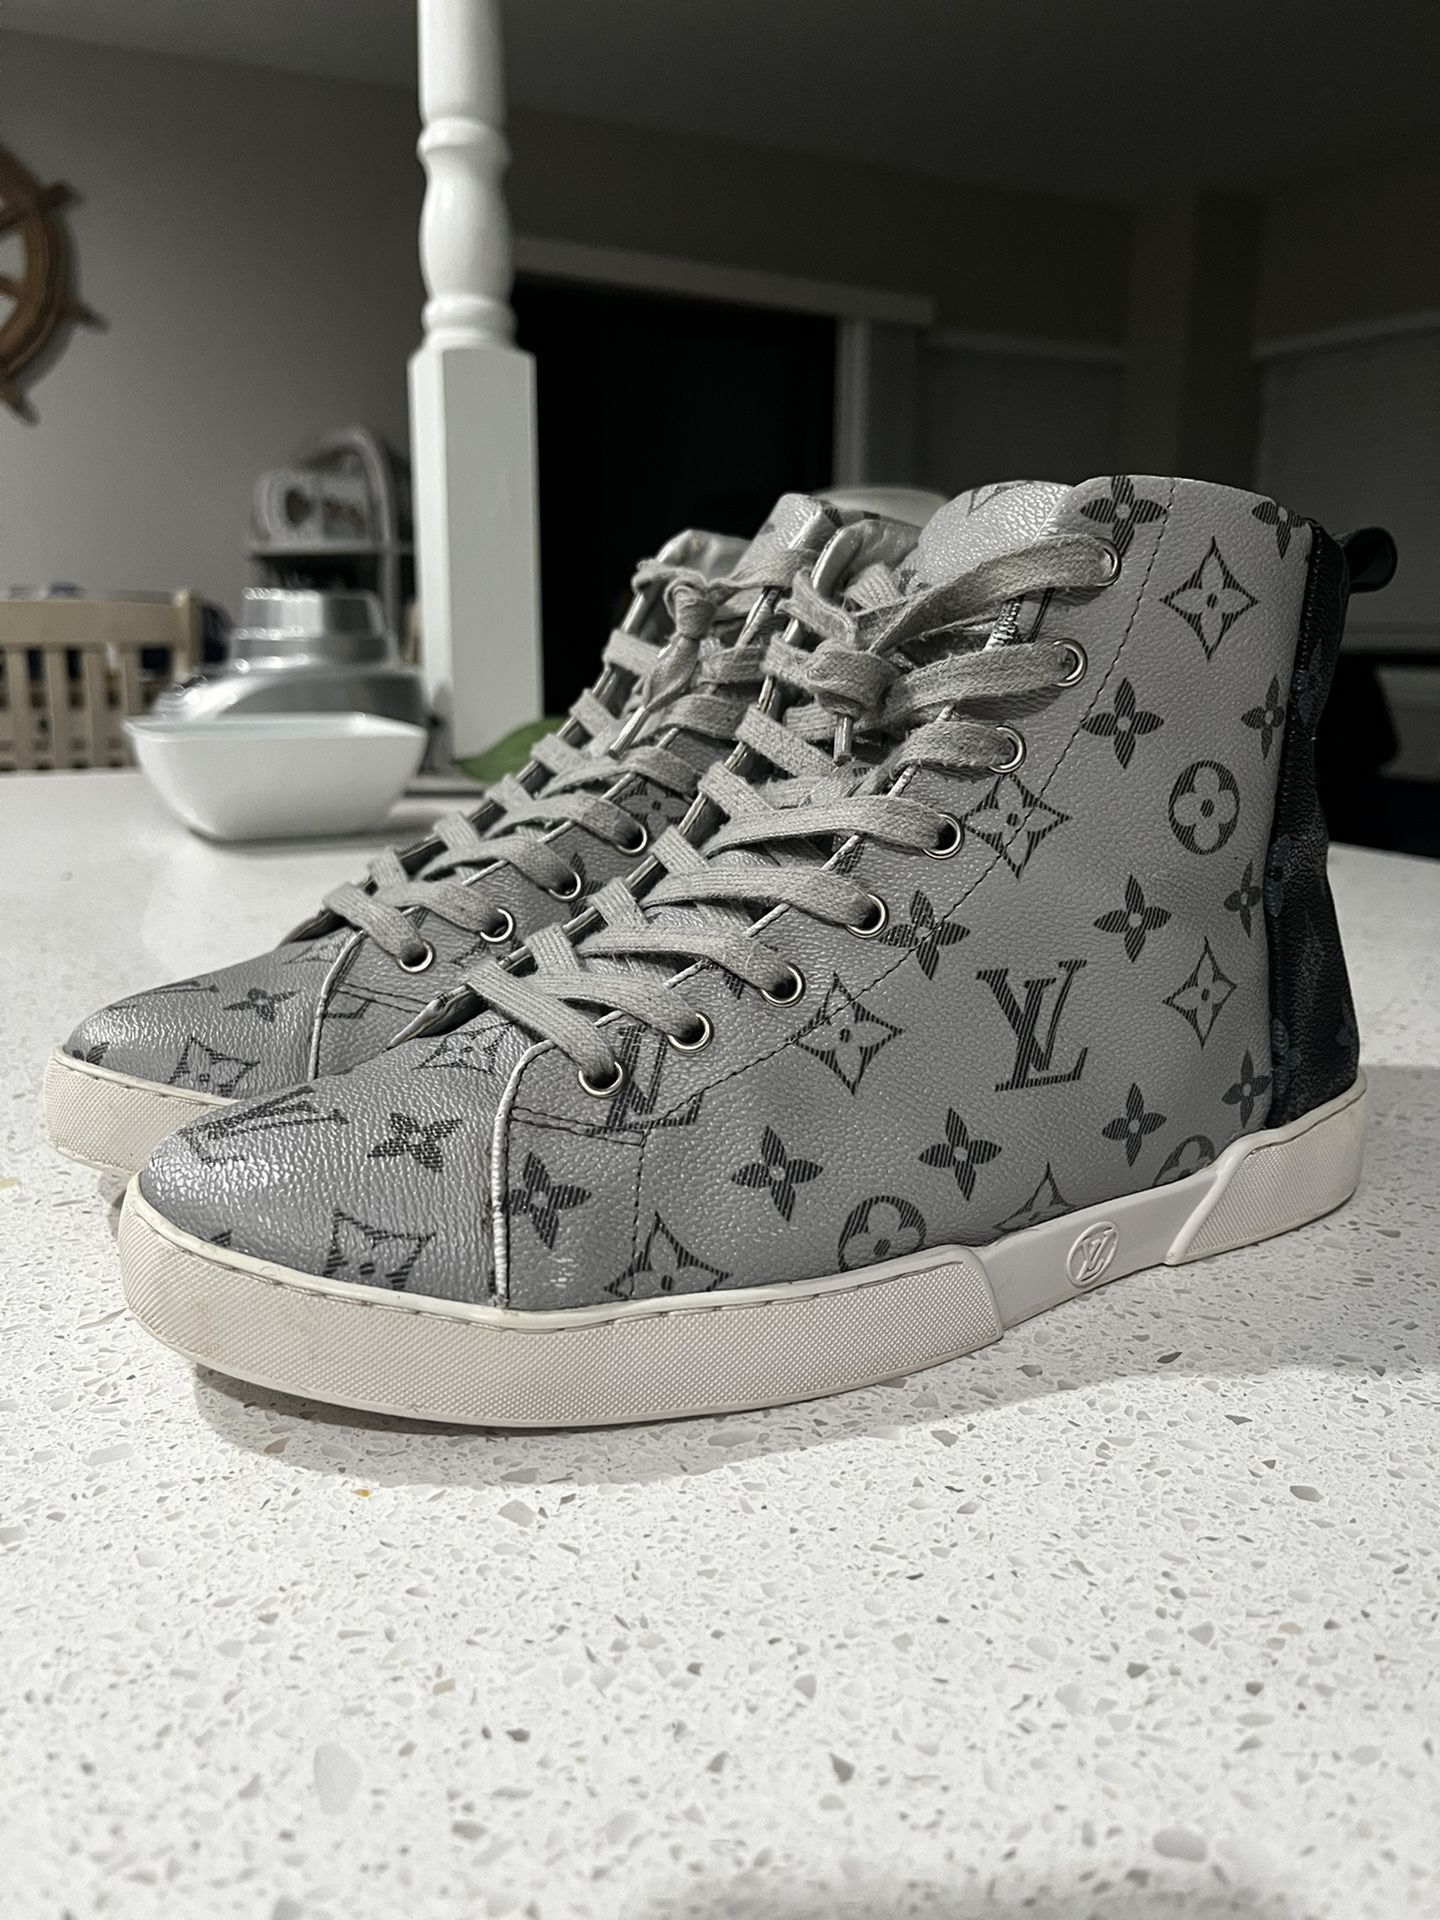 Louis Vuitton Fashion Sneakers Size 8.5. for Sale in Nashville, TN - OfferUp